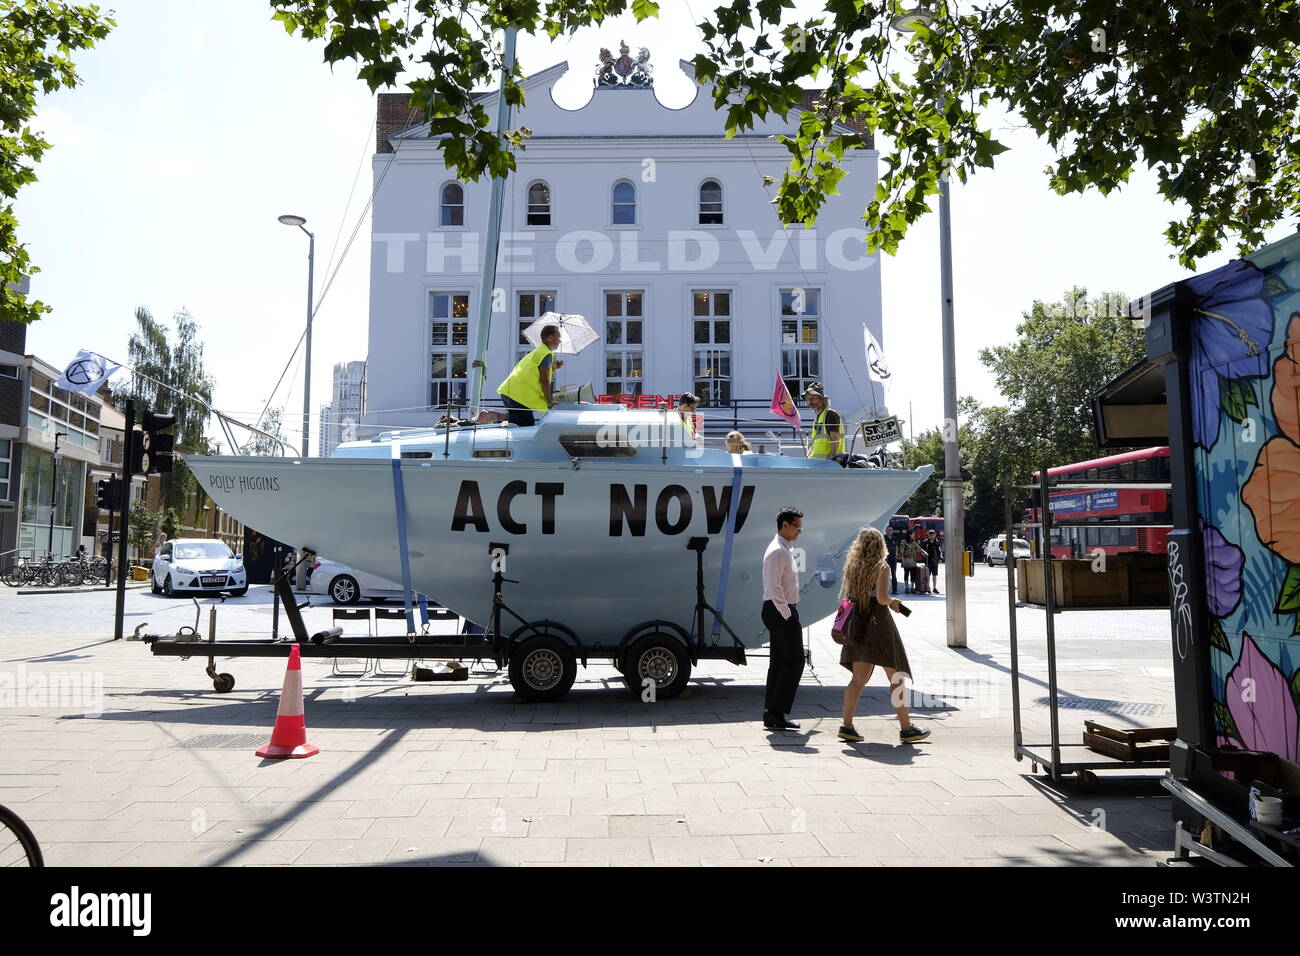 Polly Higgins, Extinction Rebellion's boat named after environmental lawyer and activist, stands proud, corner of the Cut during the Summer Uprising Stock Photo